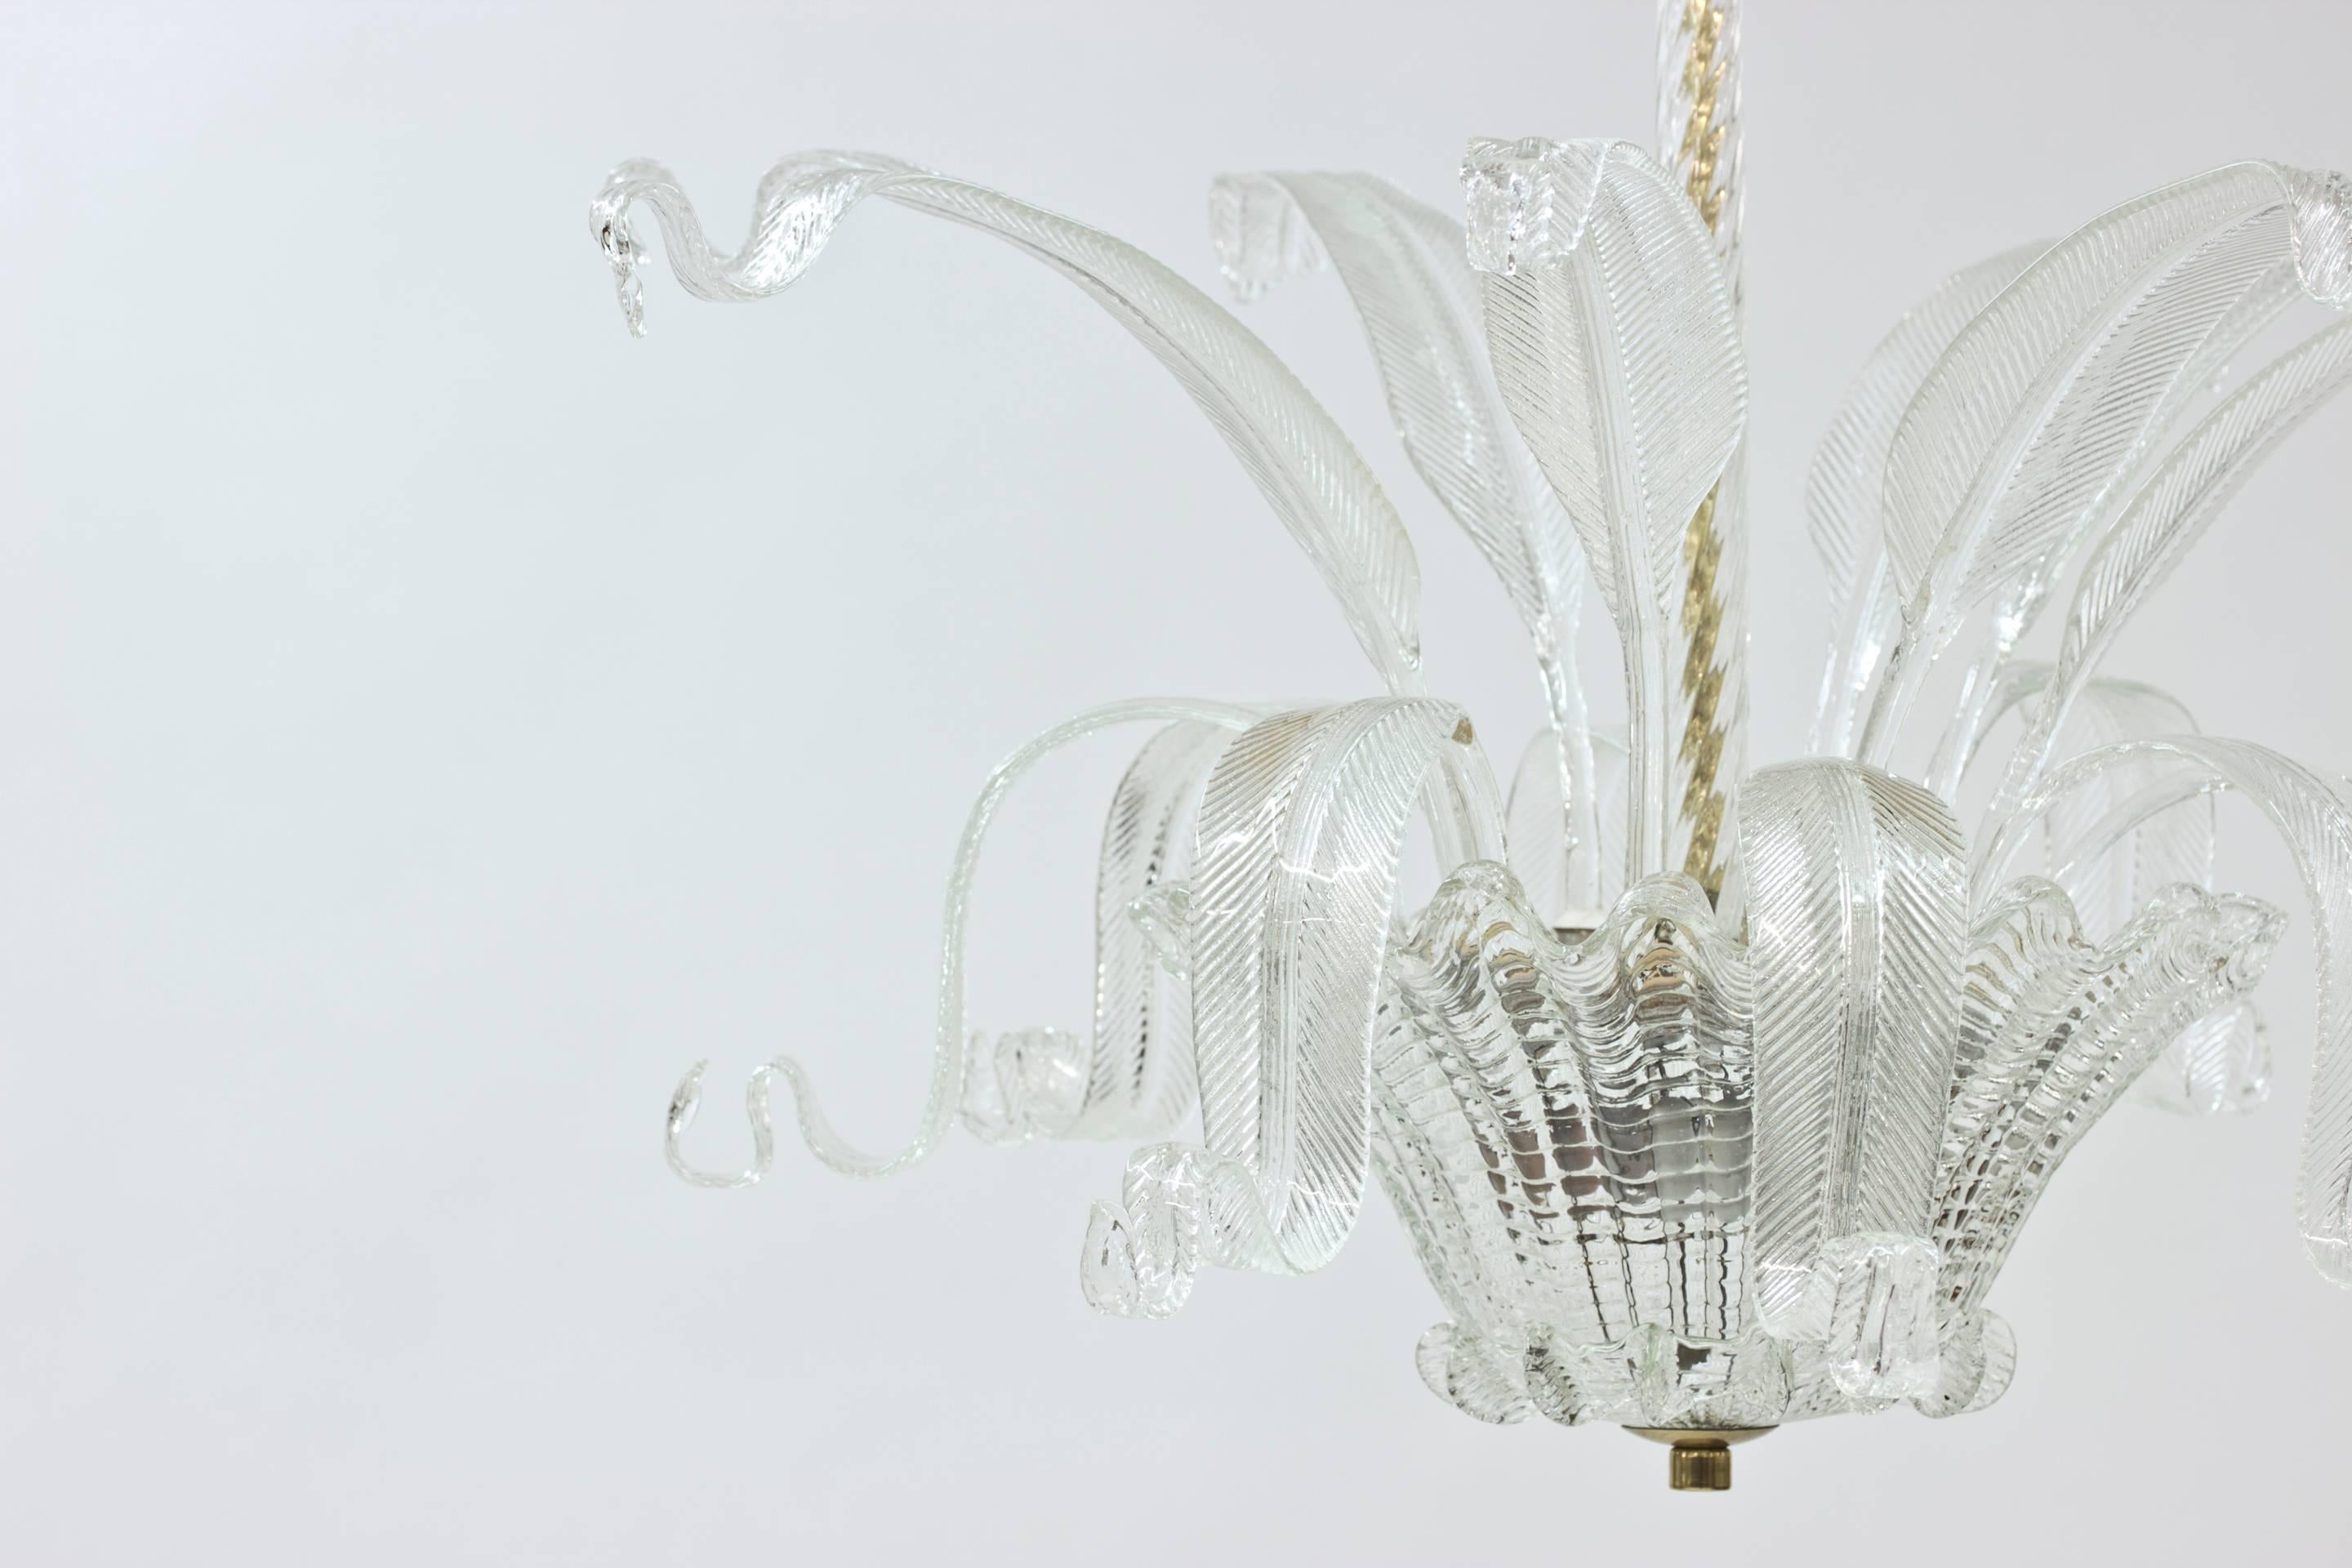 Exquisite chandelier by Fritz Kurz with featherlike glass decorations cascading joyously from the center. Made at Orrefors in the 1940s.